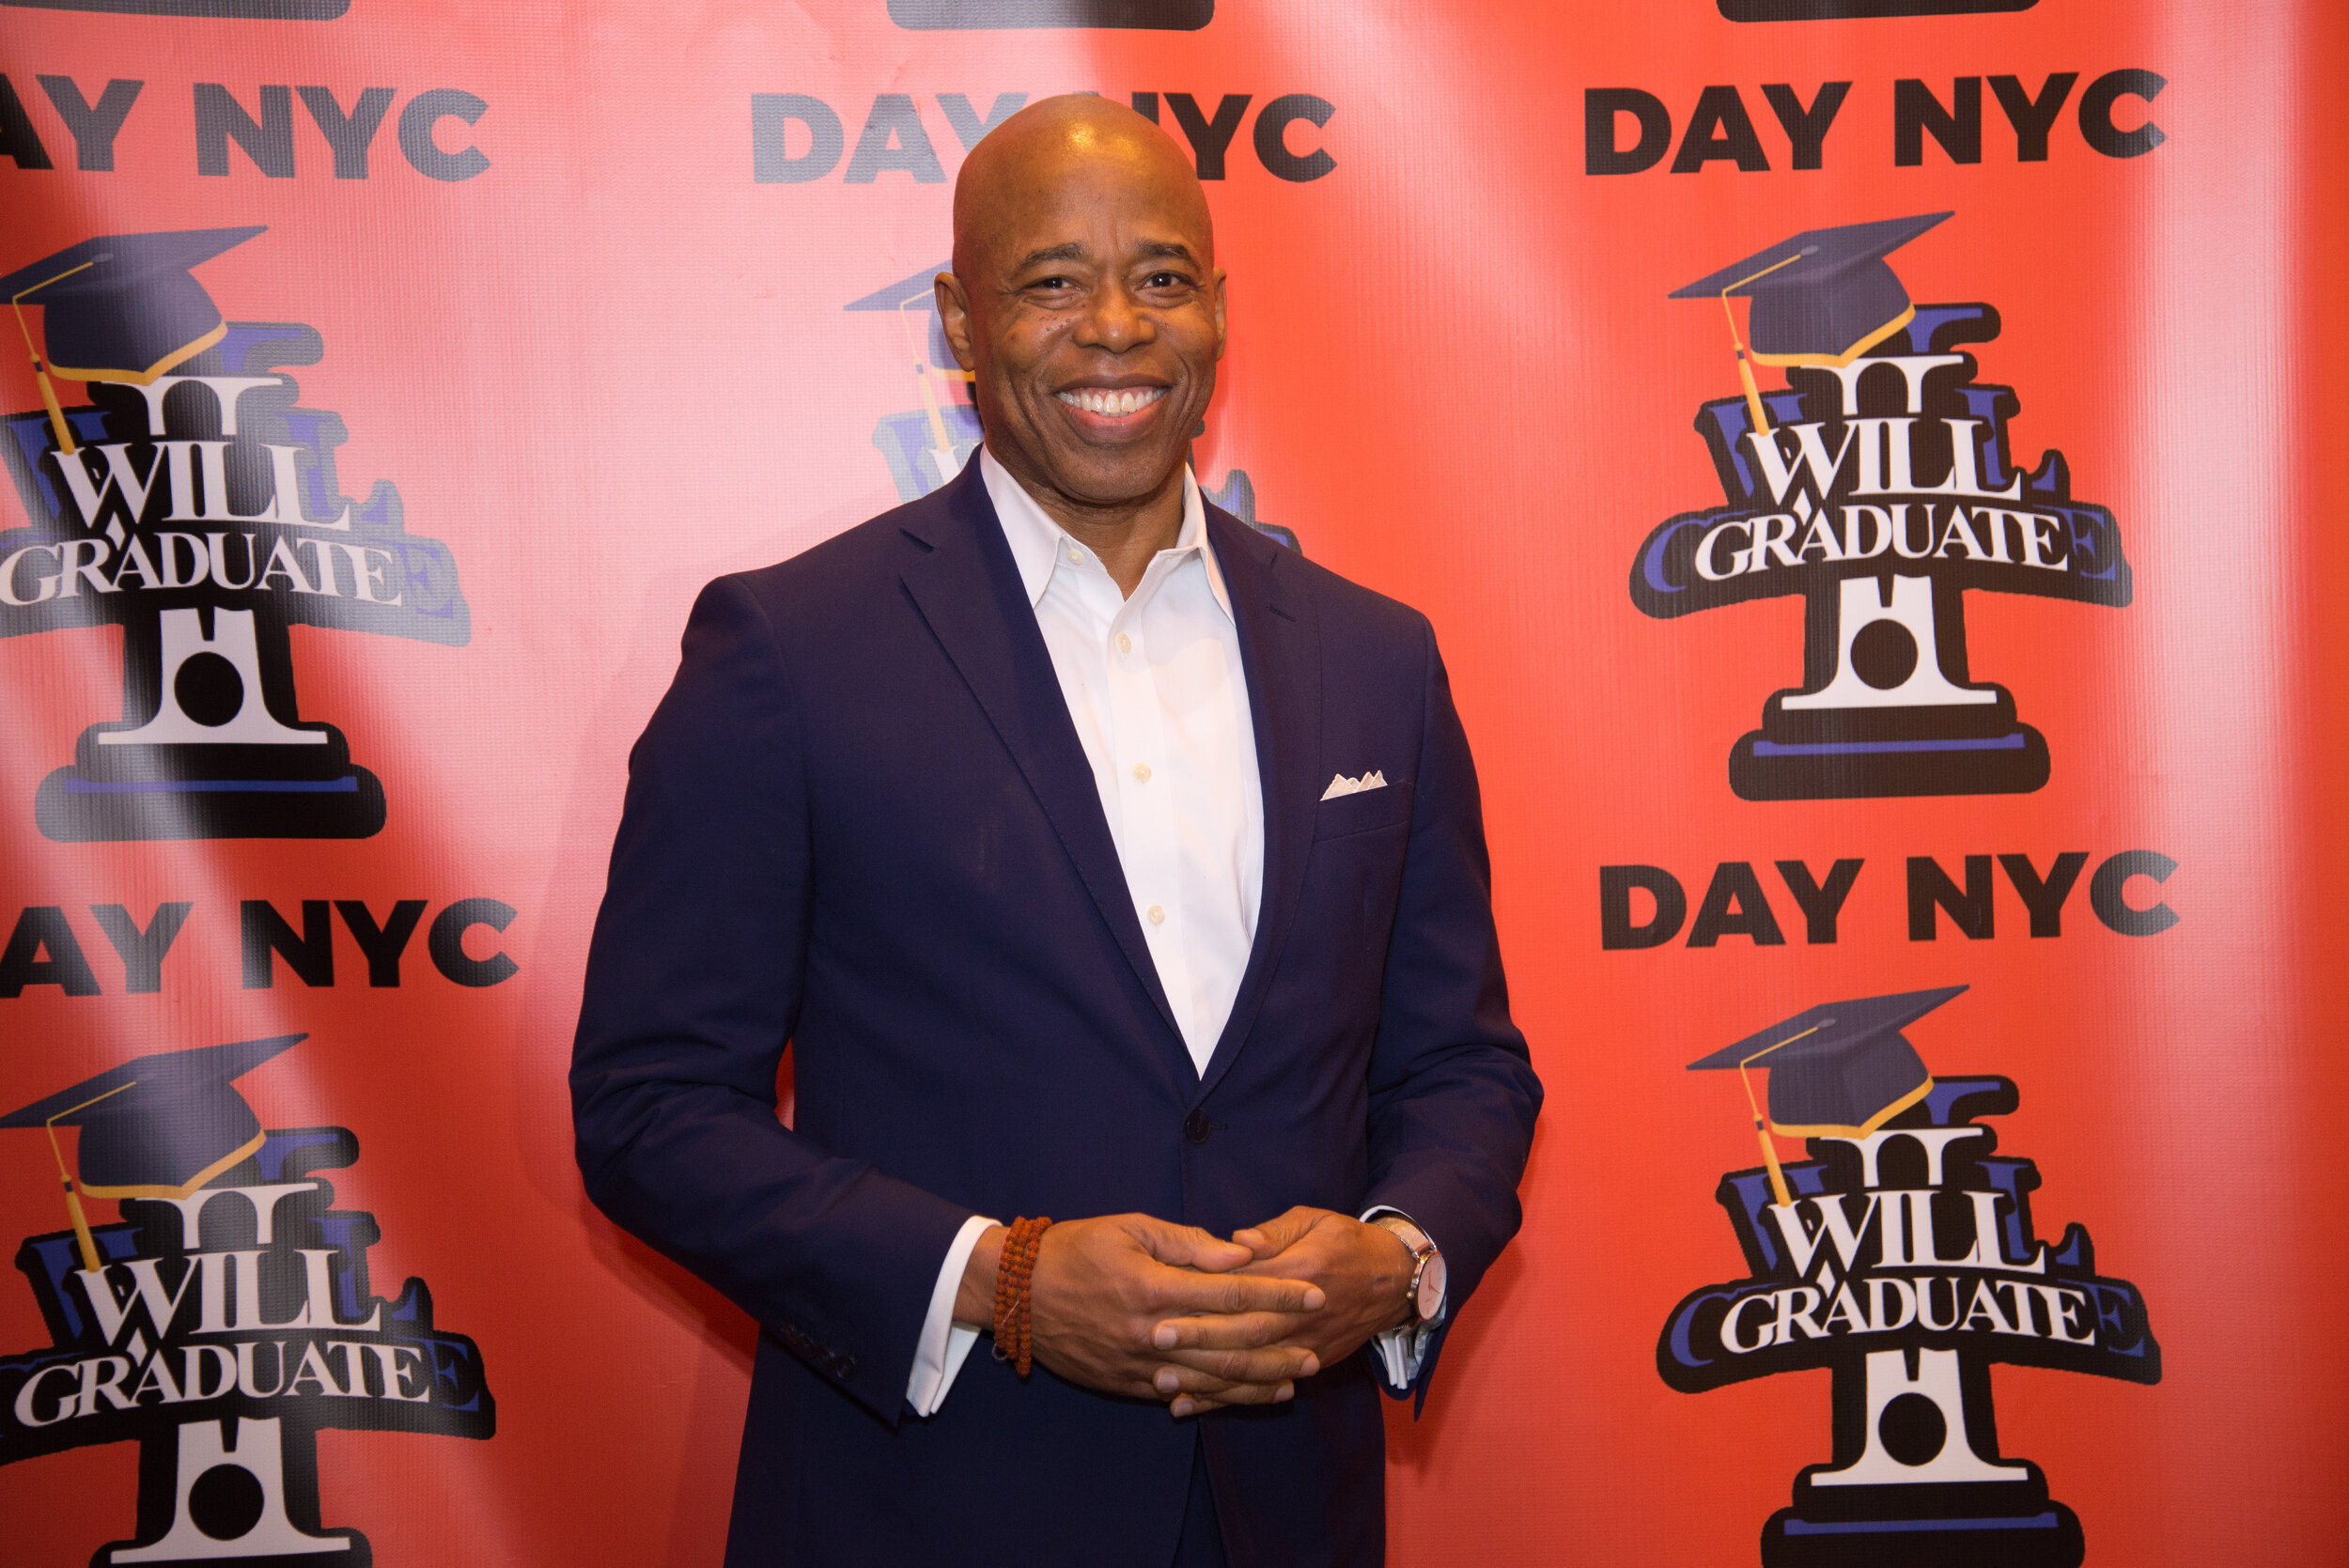 Brooklyn Borough President Eric Adams attends the I WILL GRADUATE DAY 2020 Celebration at Kings Theater. 